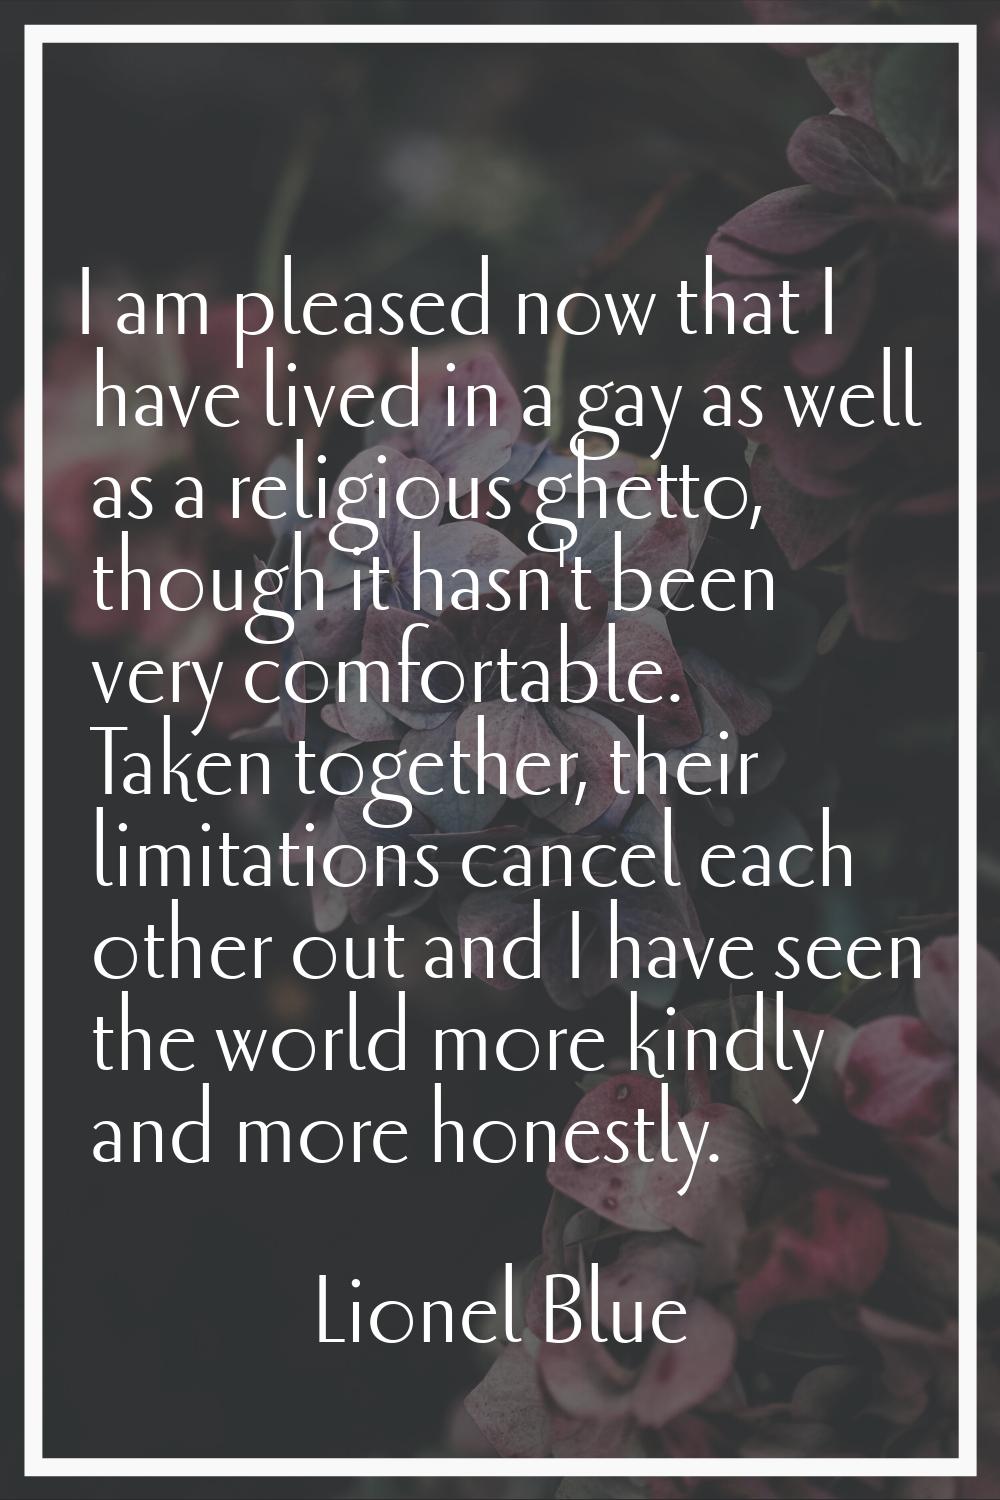 I am pleased now that I have lived in a gay as well as a religious ghetto, though it hasn't been ve